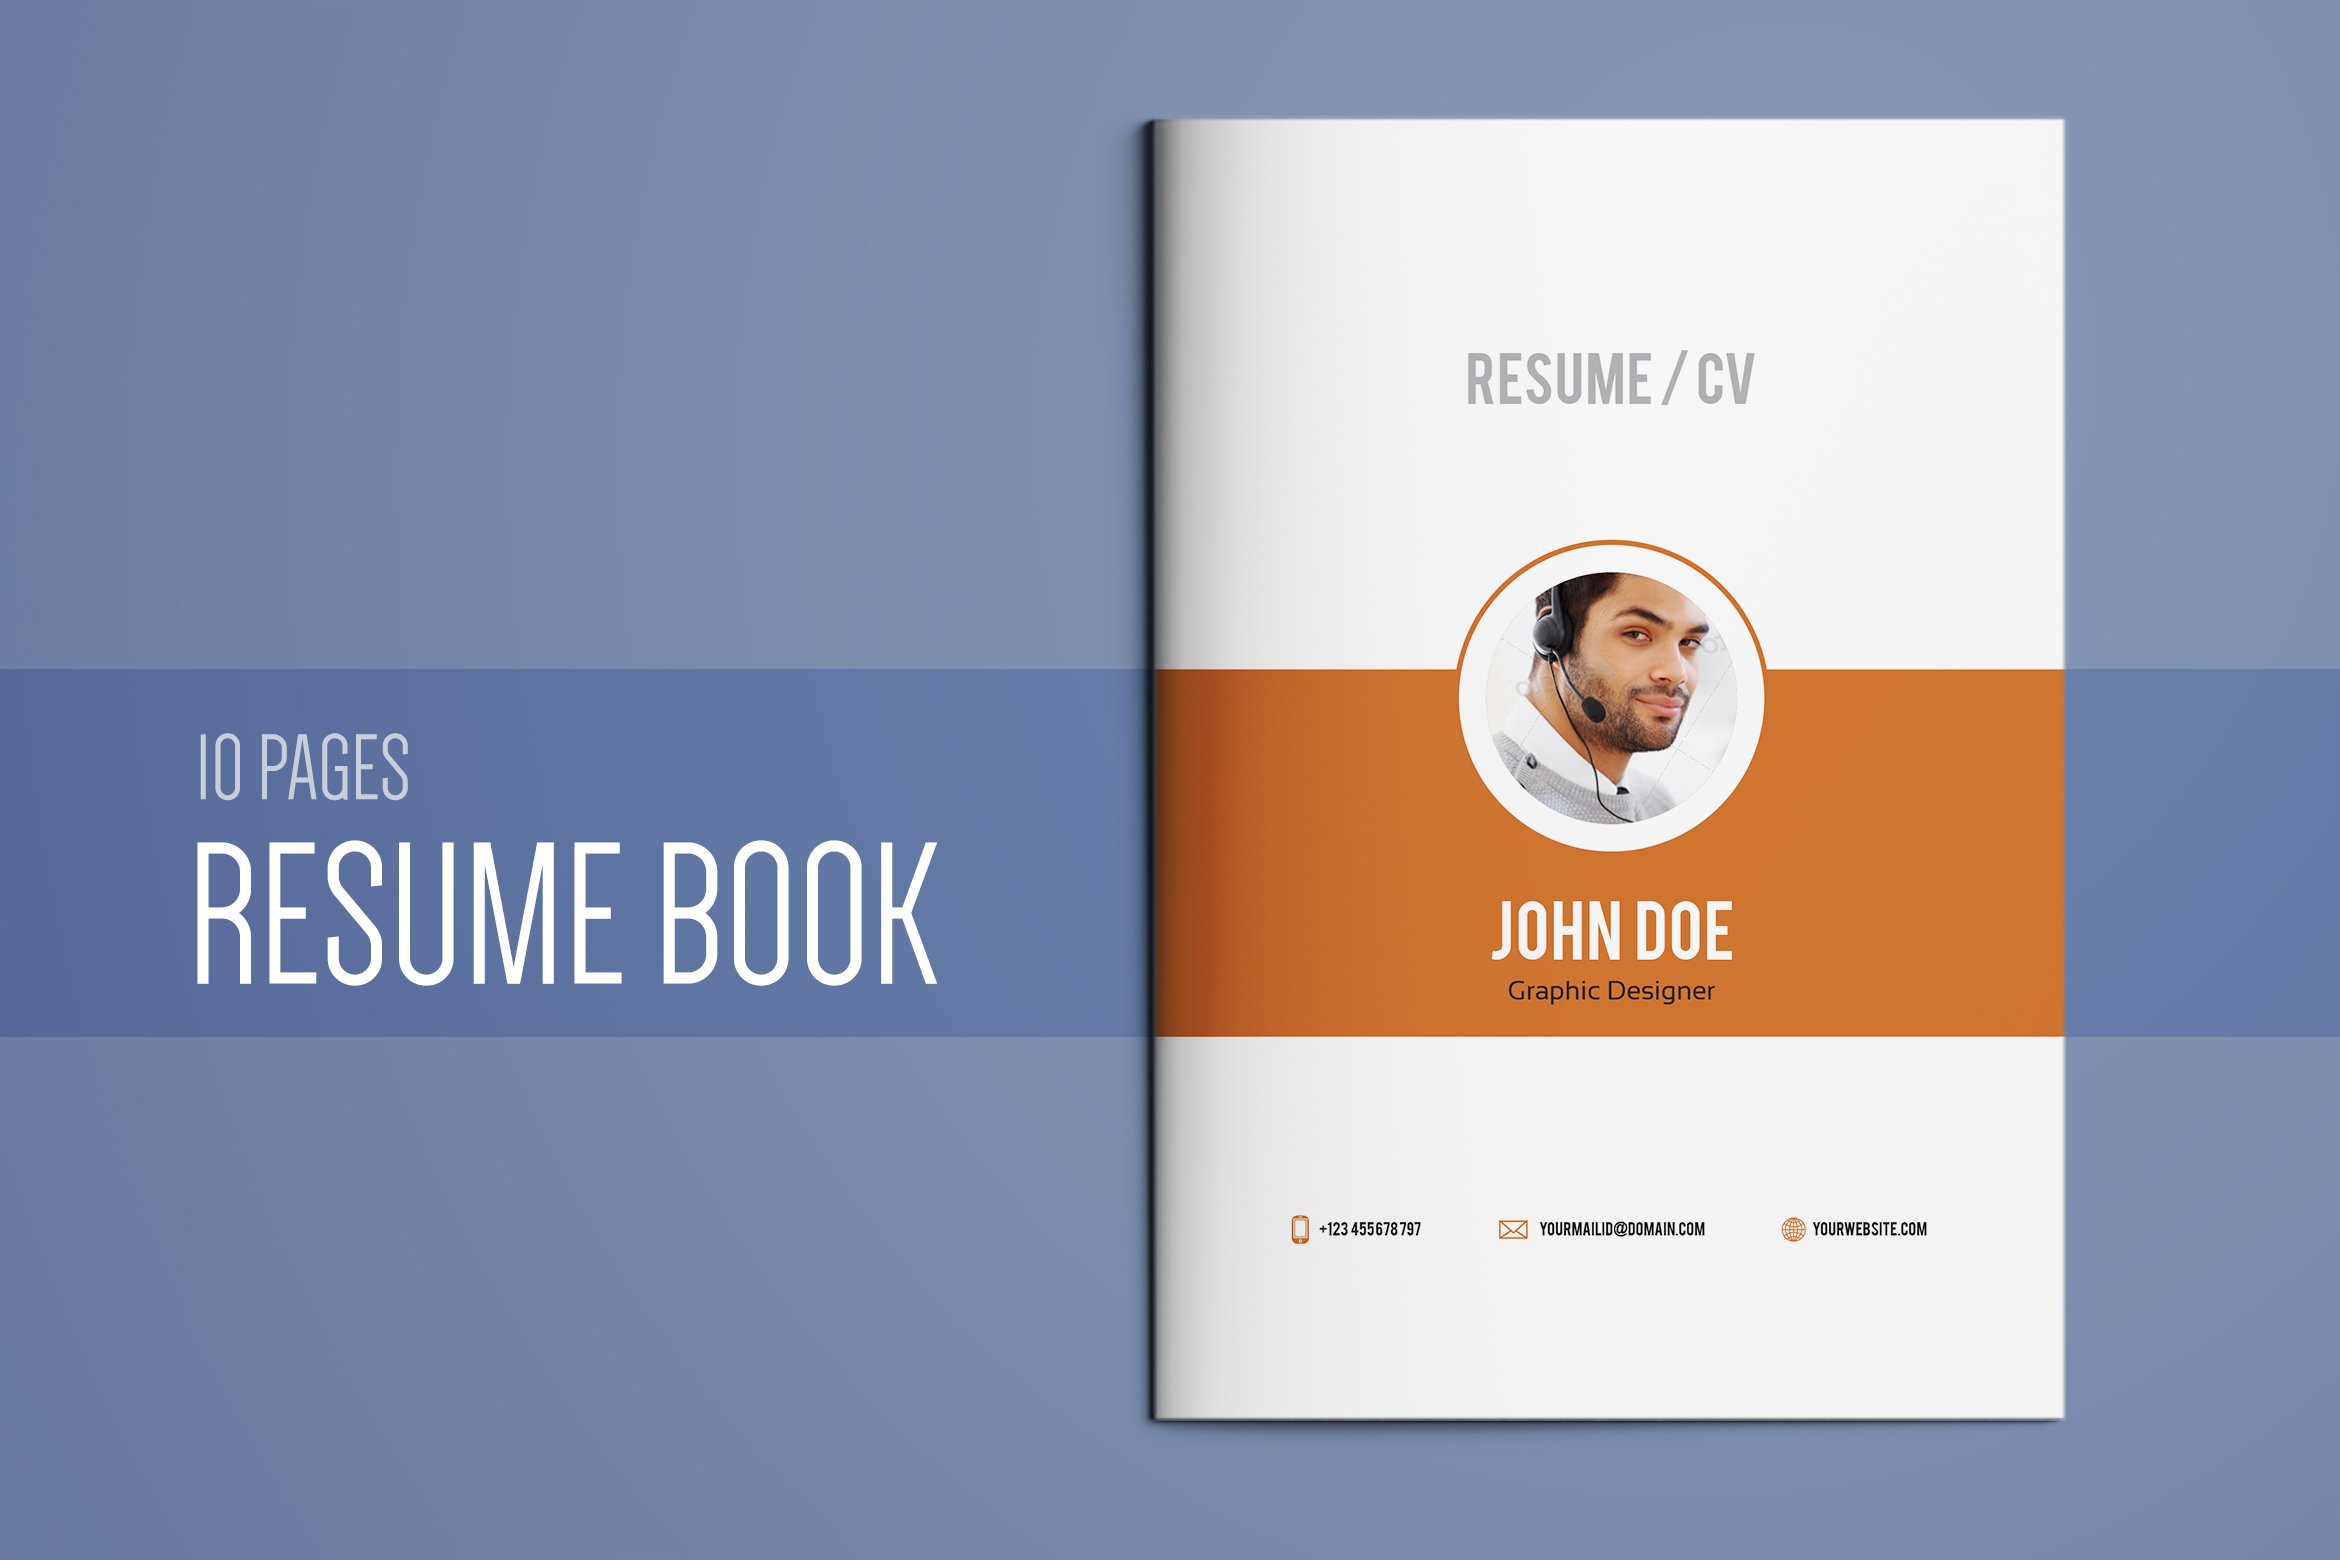 Resume Booklet Template Vol. 01 cover image.